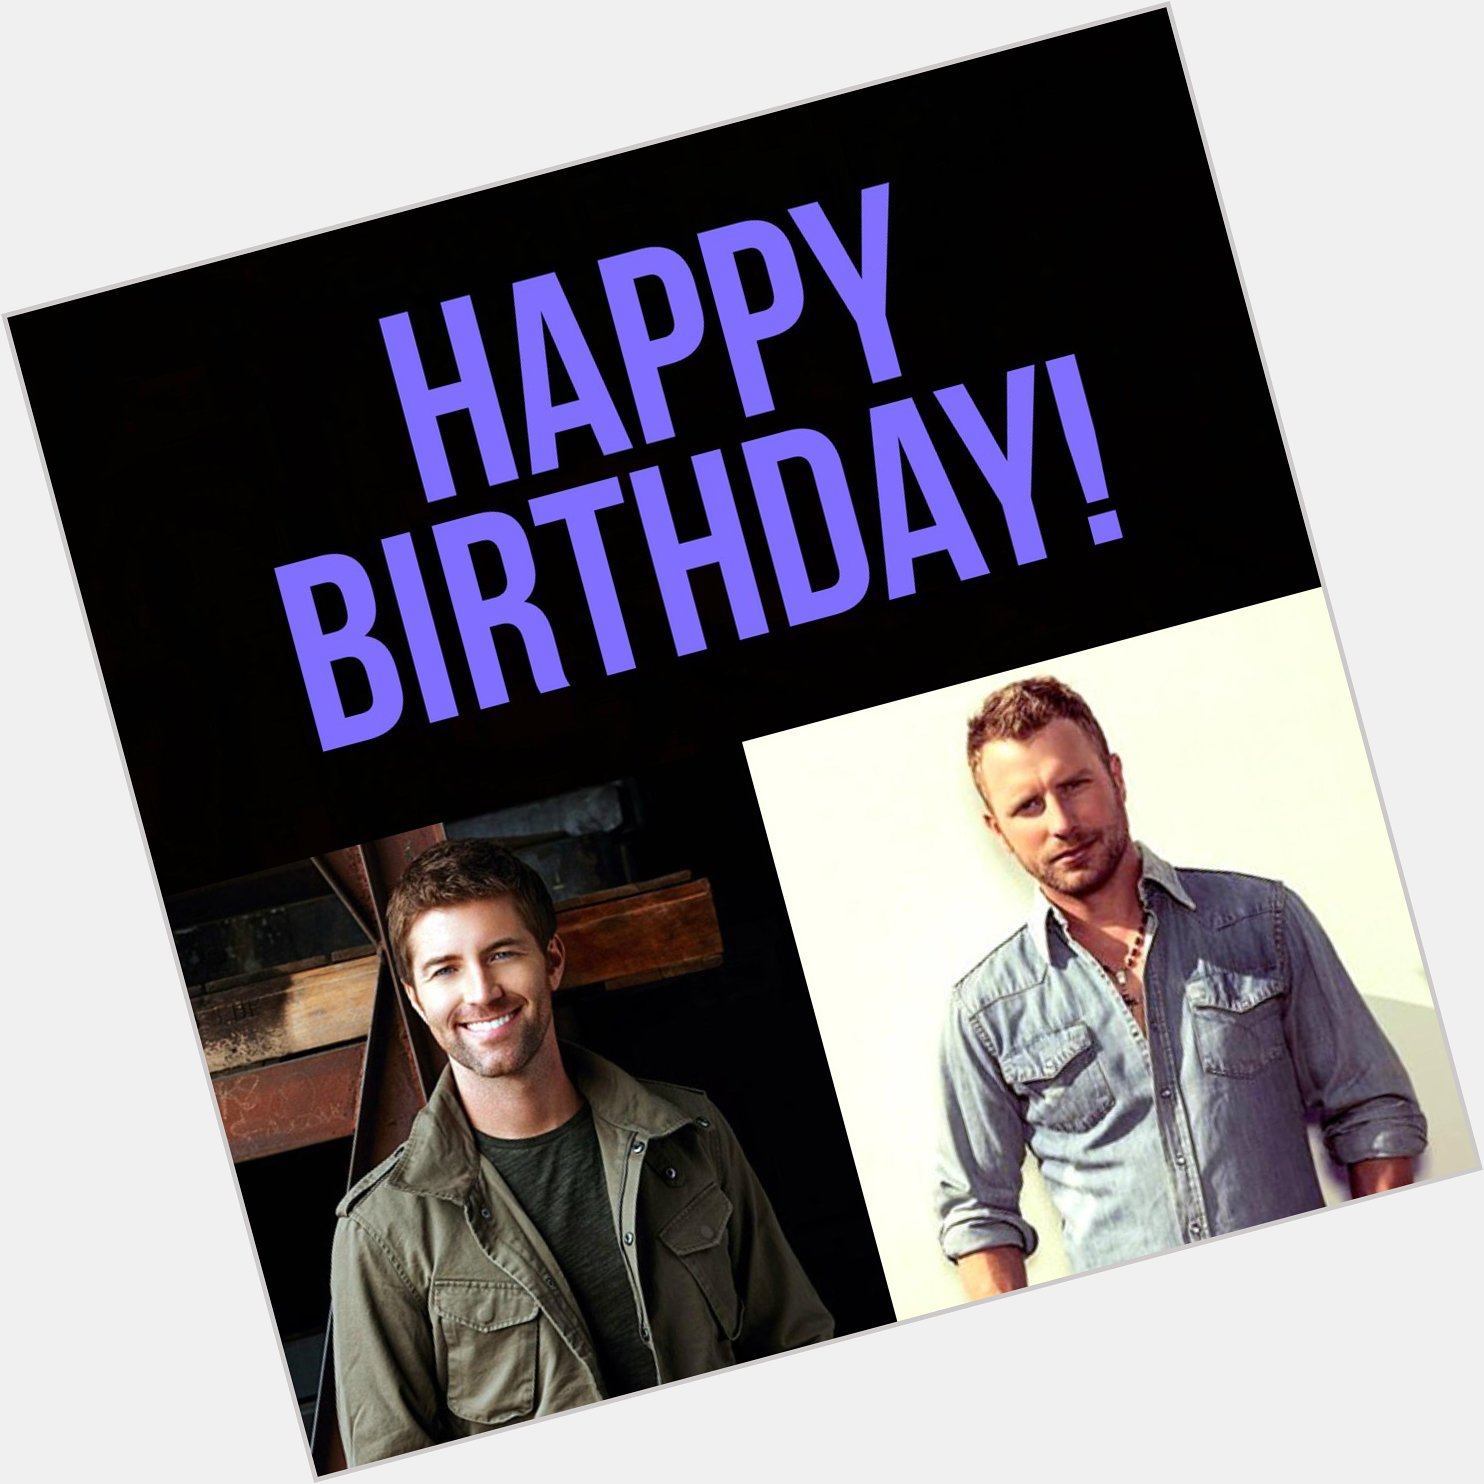 Happy birthday to a couple of our favorite country singers, Josh Turner and Dierks Bentley! 